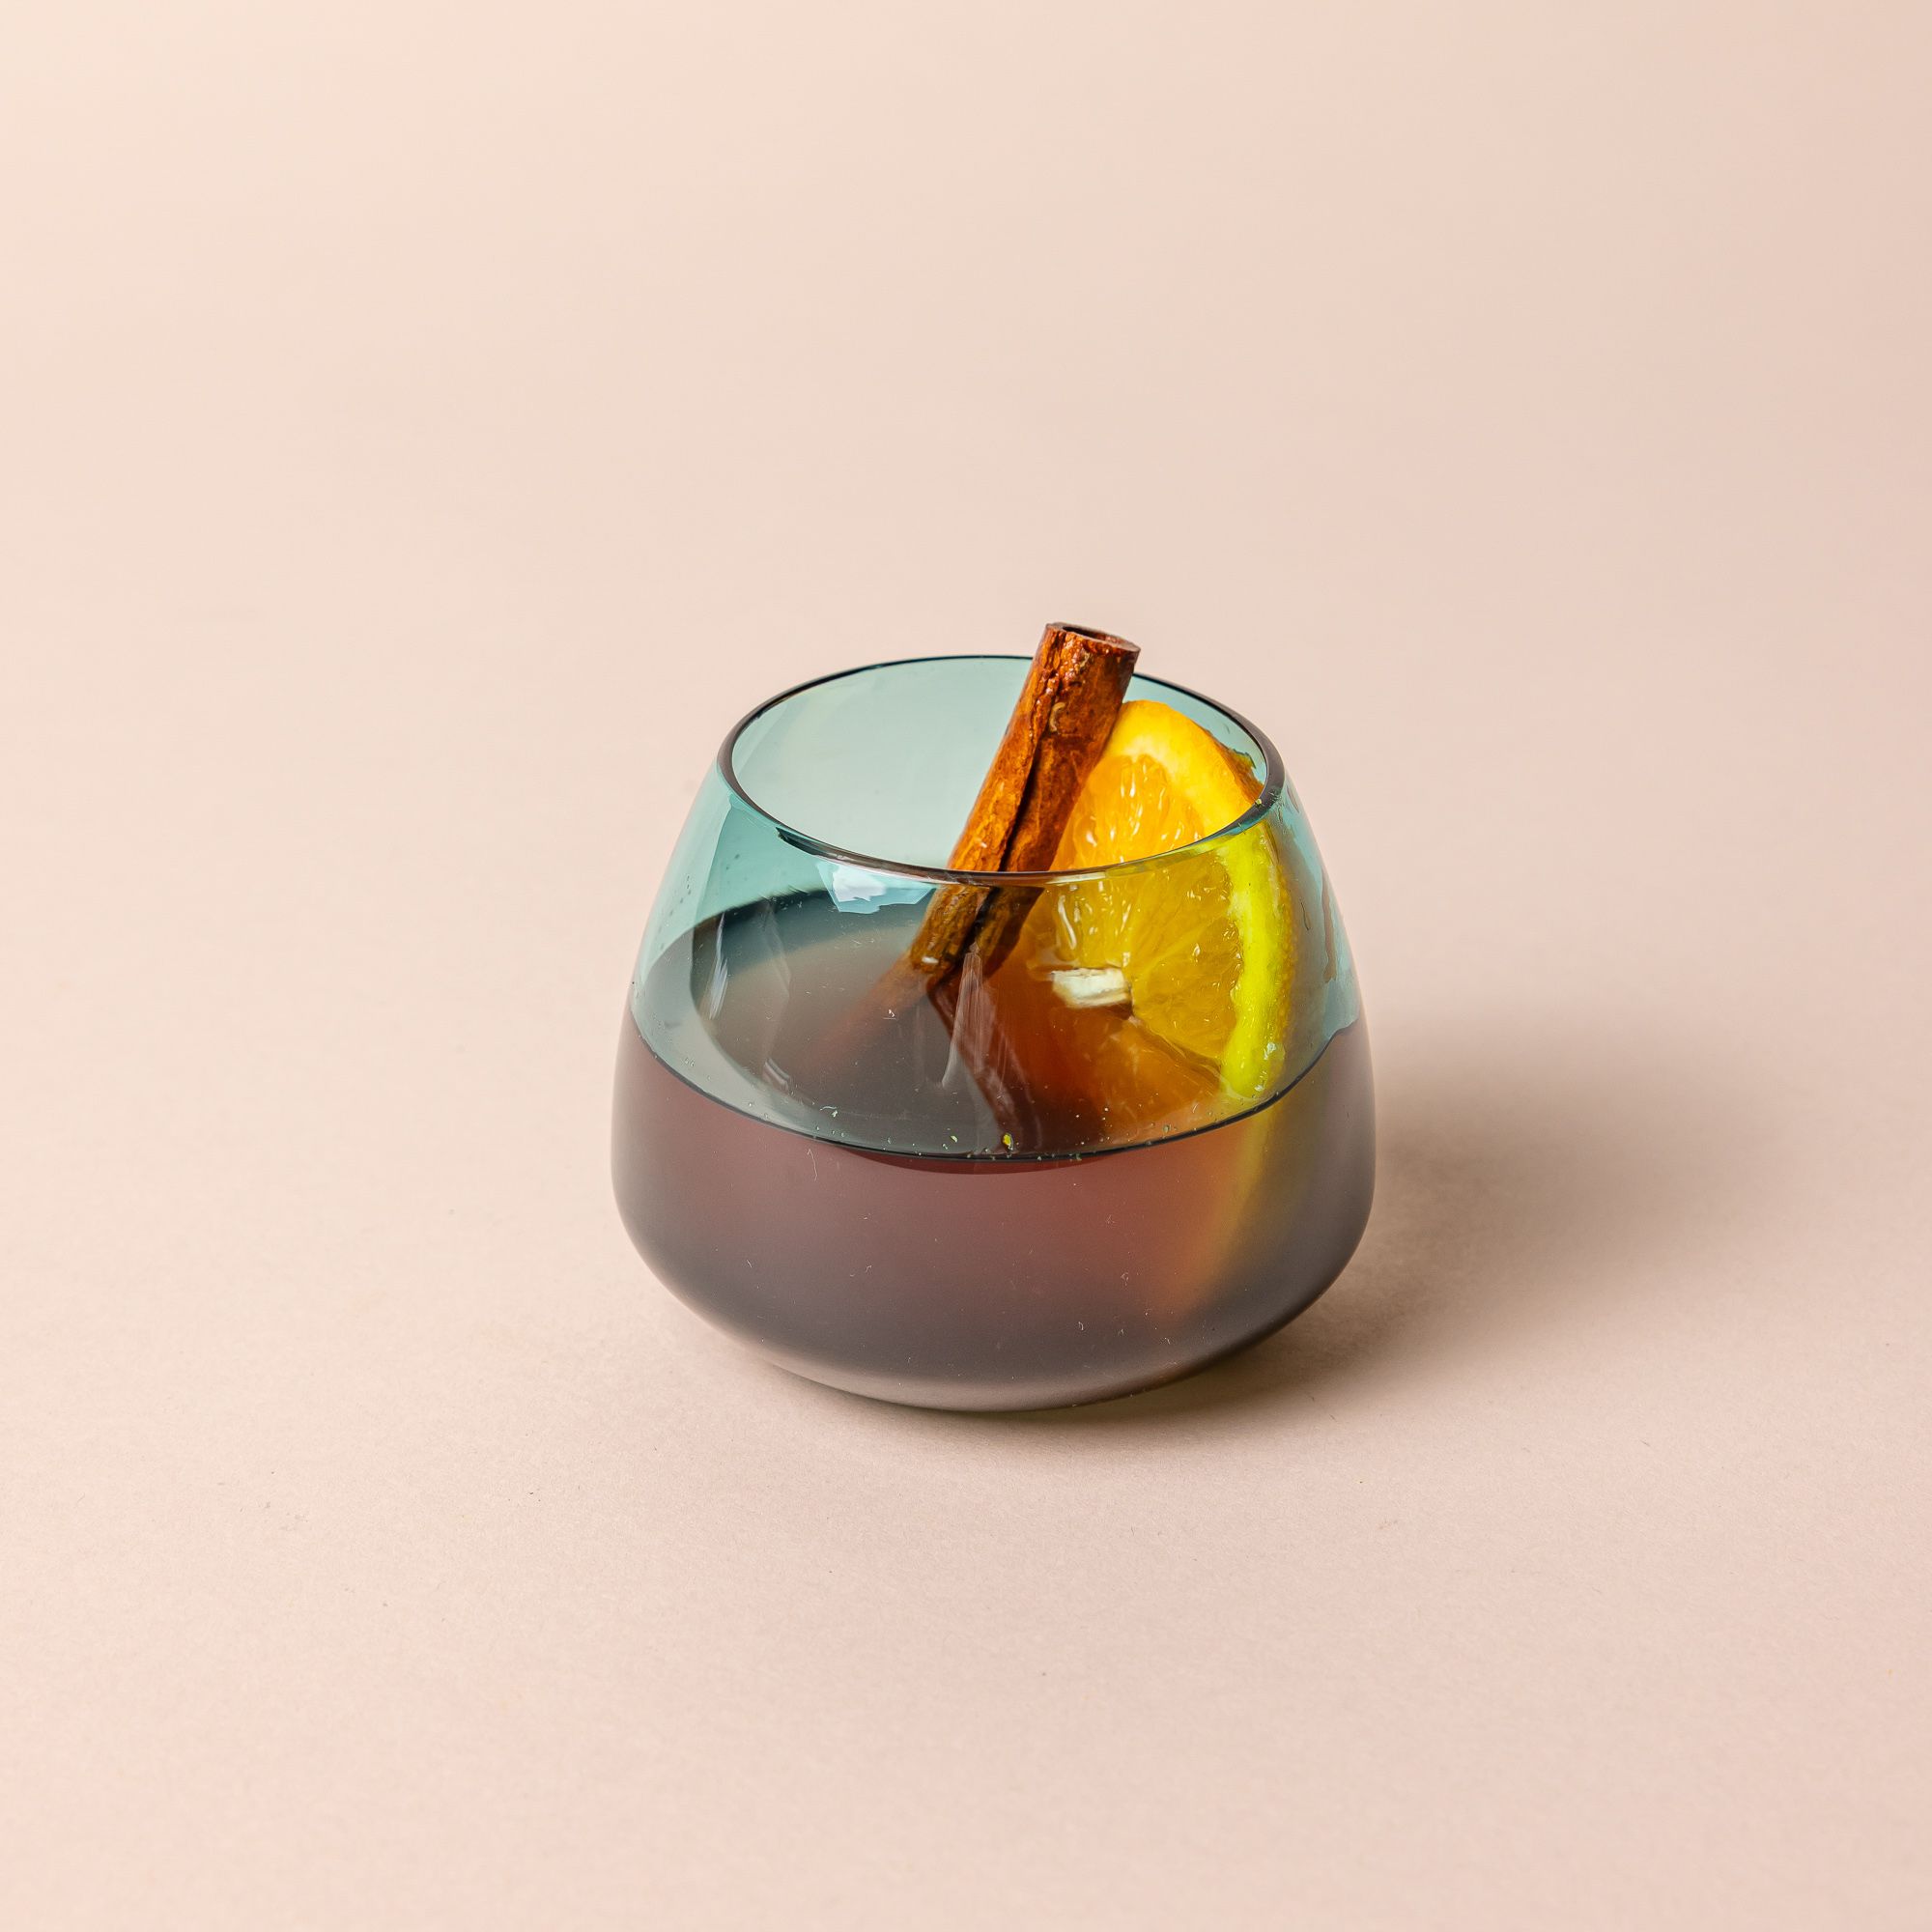 A round short aqua blue glass punch cup filled with a winter cocktail featuring an orange slice and cinnamon stick. The cup has a round base that narrows a bit near the top.